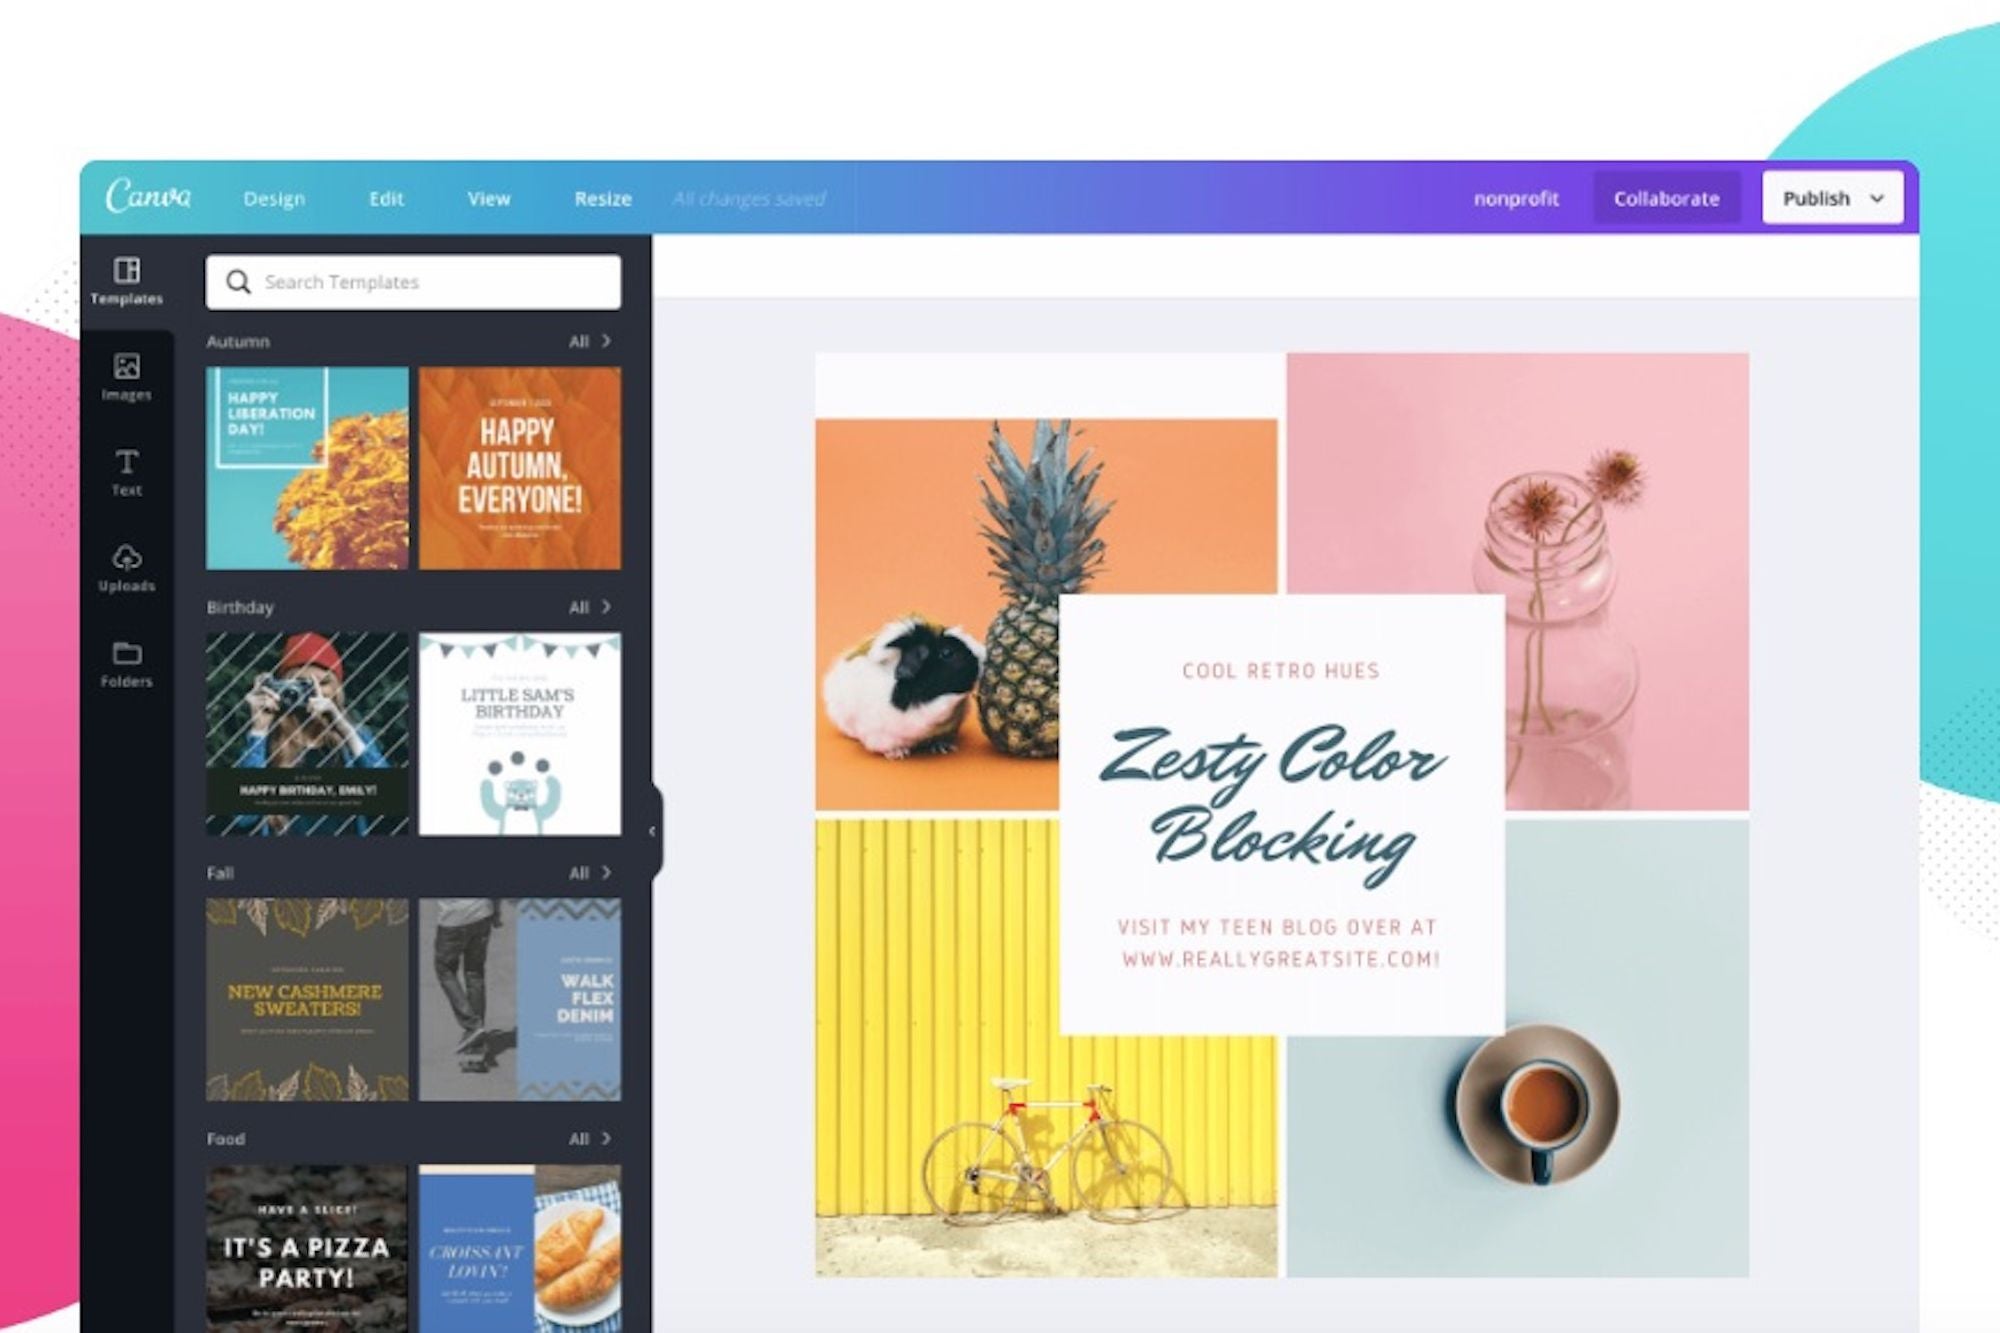 Learn Canva from scratch. Create 11 graphic design projects with Canva specifically for entrepreneurs. What you’ll learn Requirements Description This online course will teach you how to use Canva to create PRACTICAL REAL WORLD projects for your business